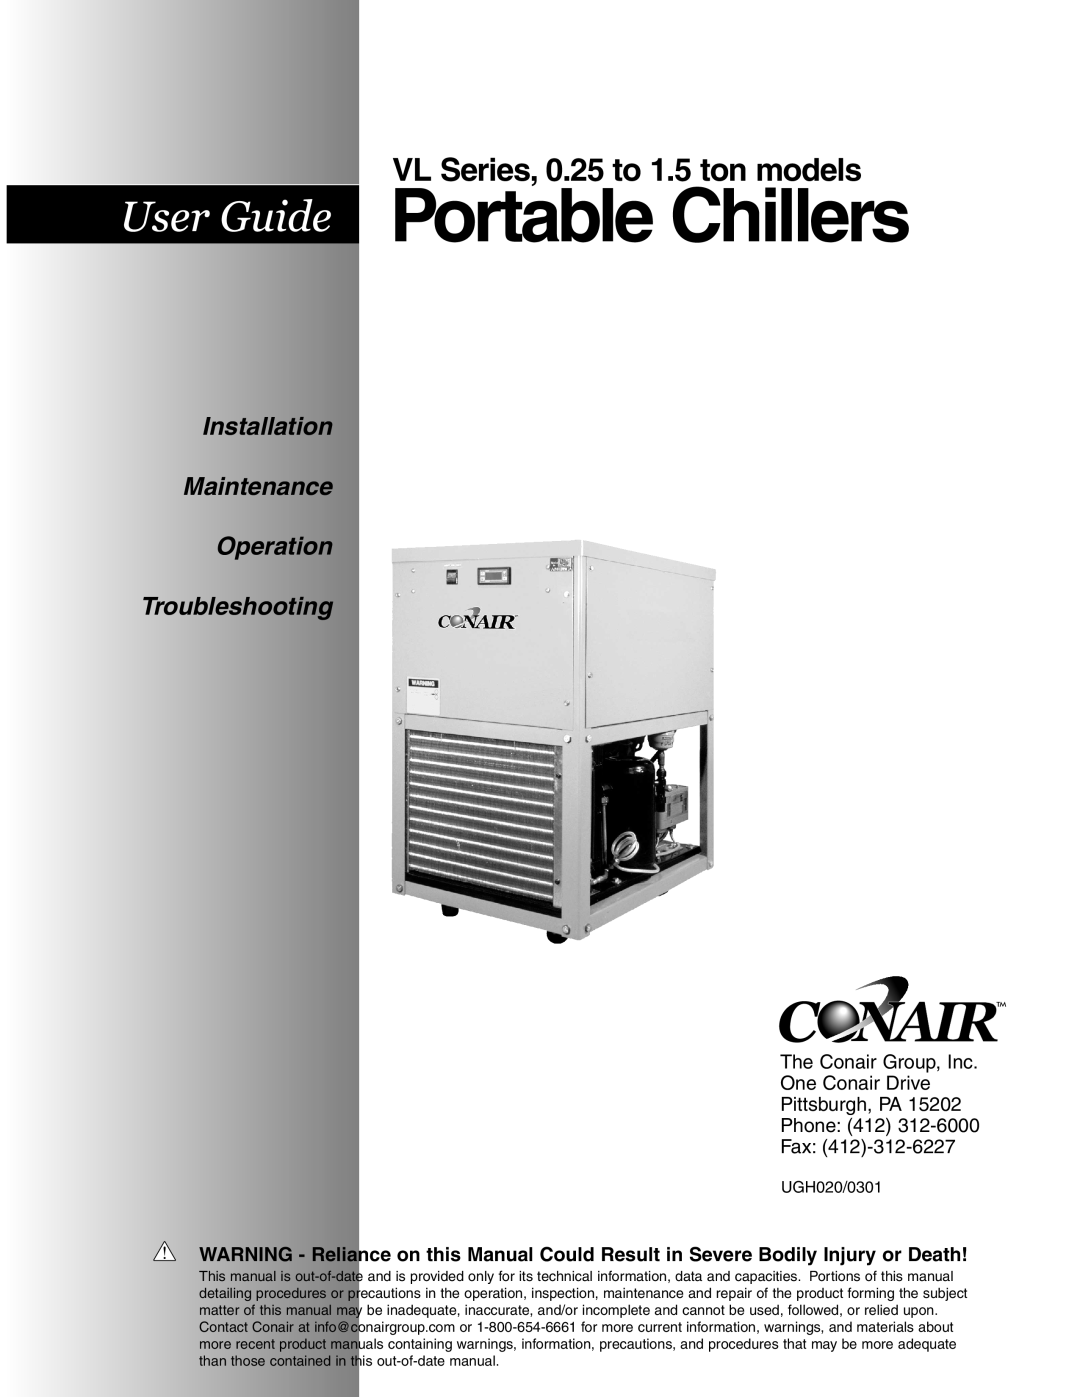 Conair manual VL Series, 0.25 to 1.5 ton models, Portable Chillers, Installation Maintenance Operation, Troubleshooting 